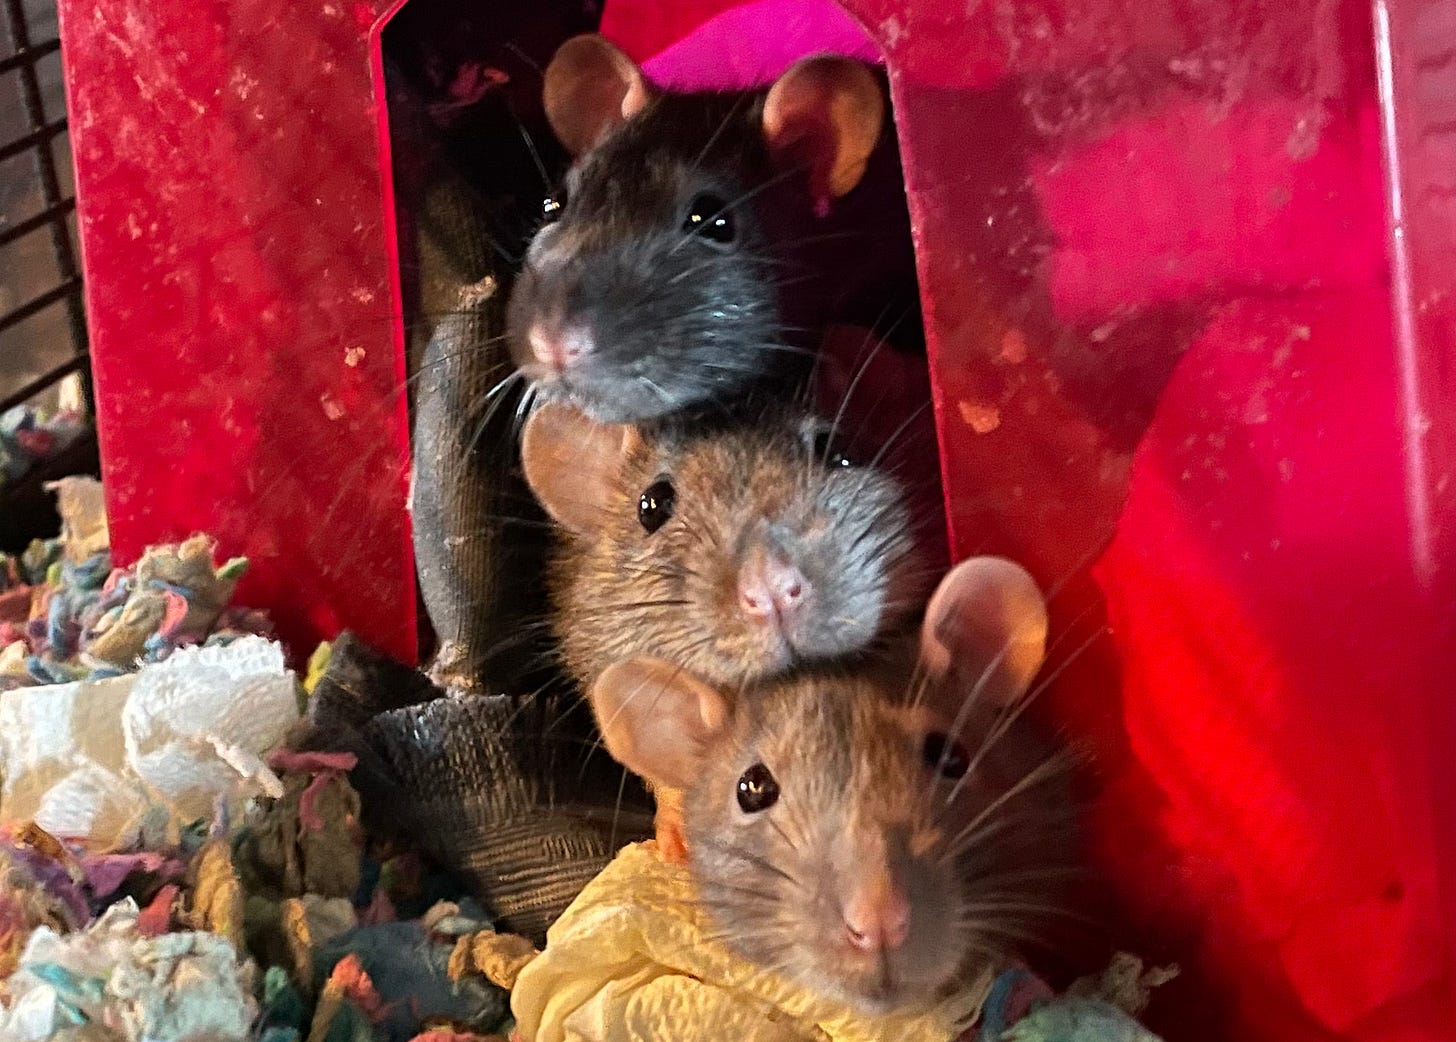 3 fancy rats poke their heads outside a transluscent red house